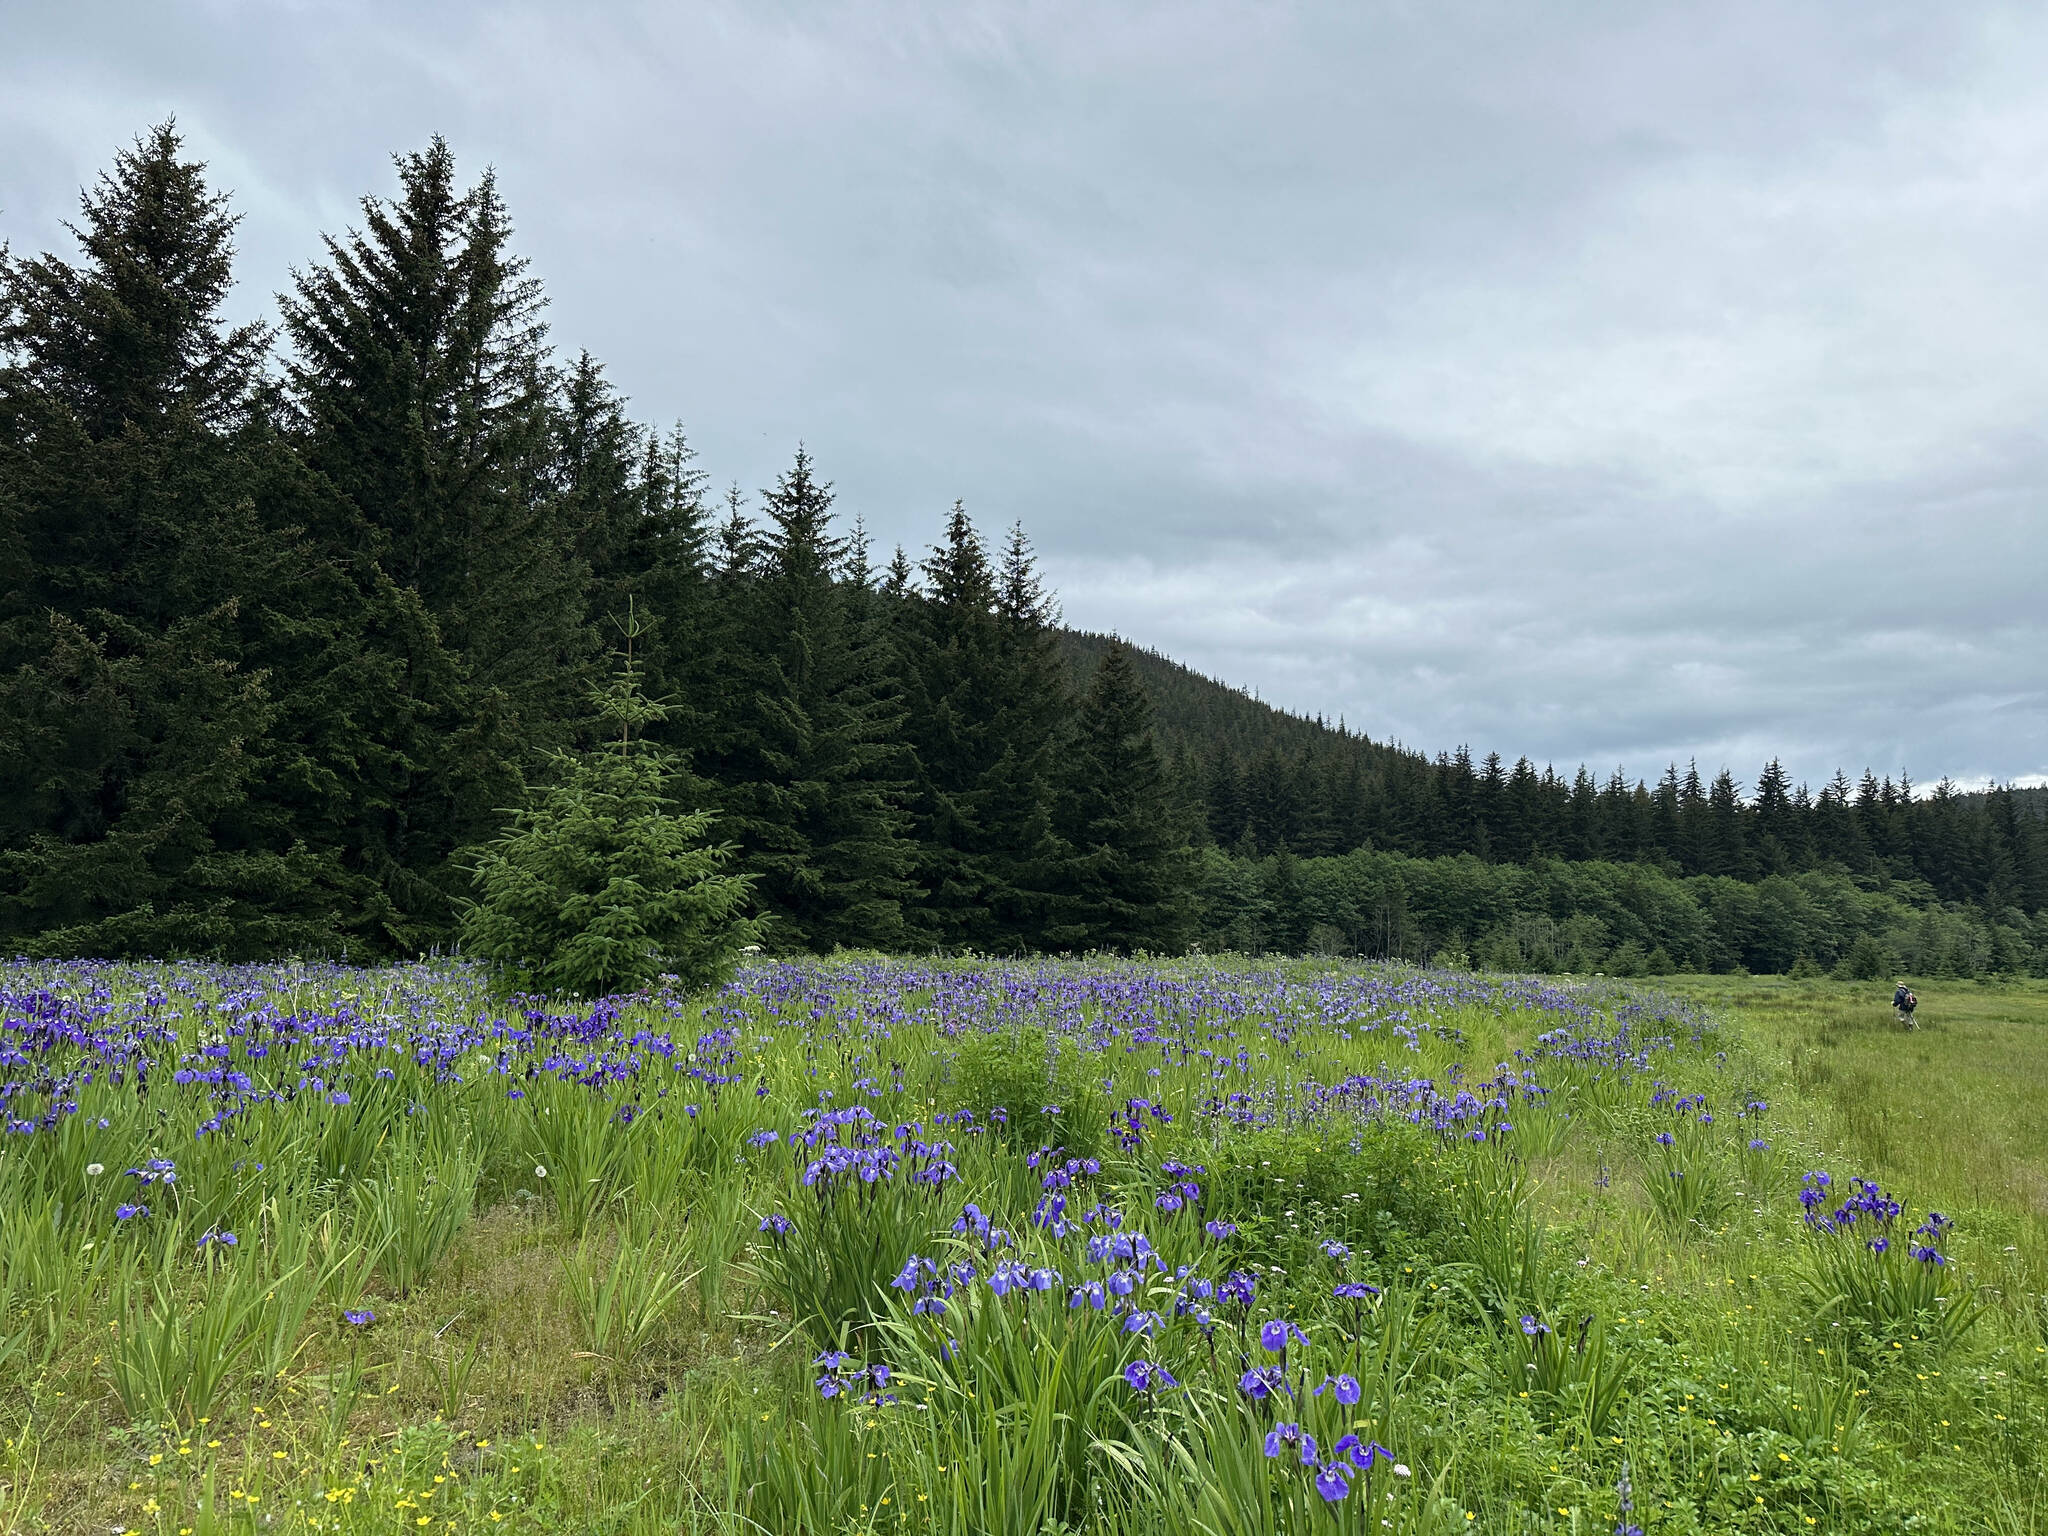 A meadow along on the Point Bridget Trail on June 24. (Photo by Deana Barajas)